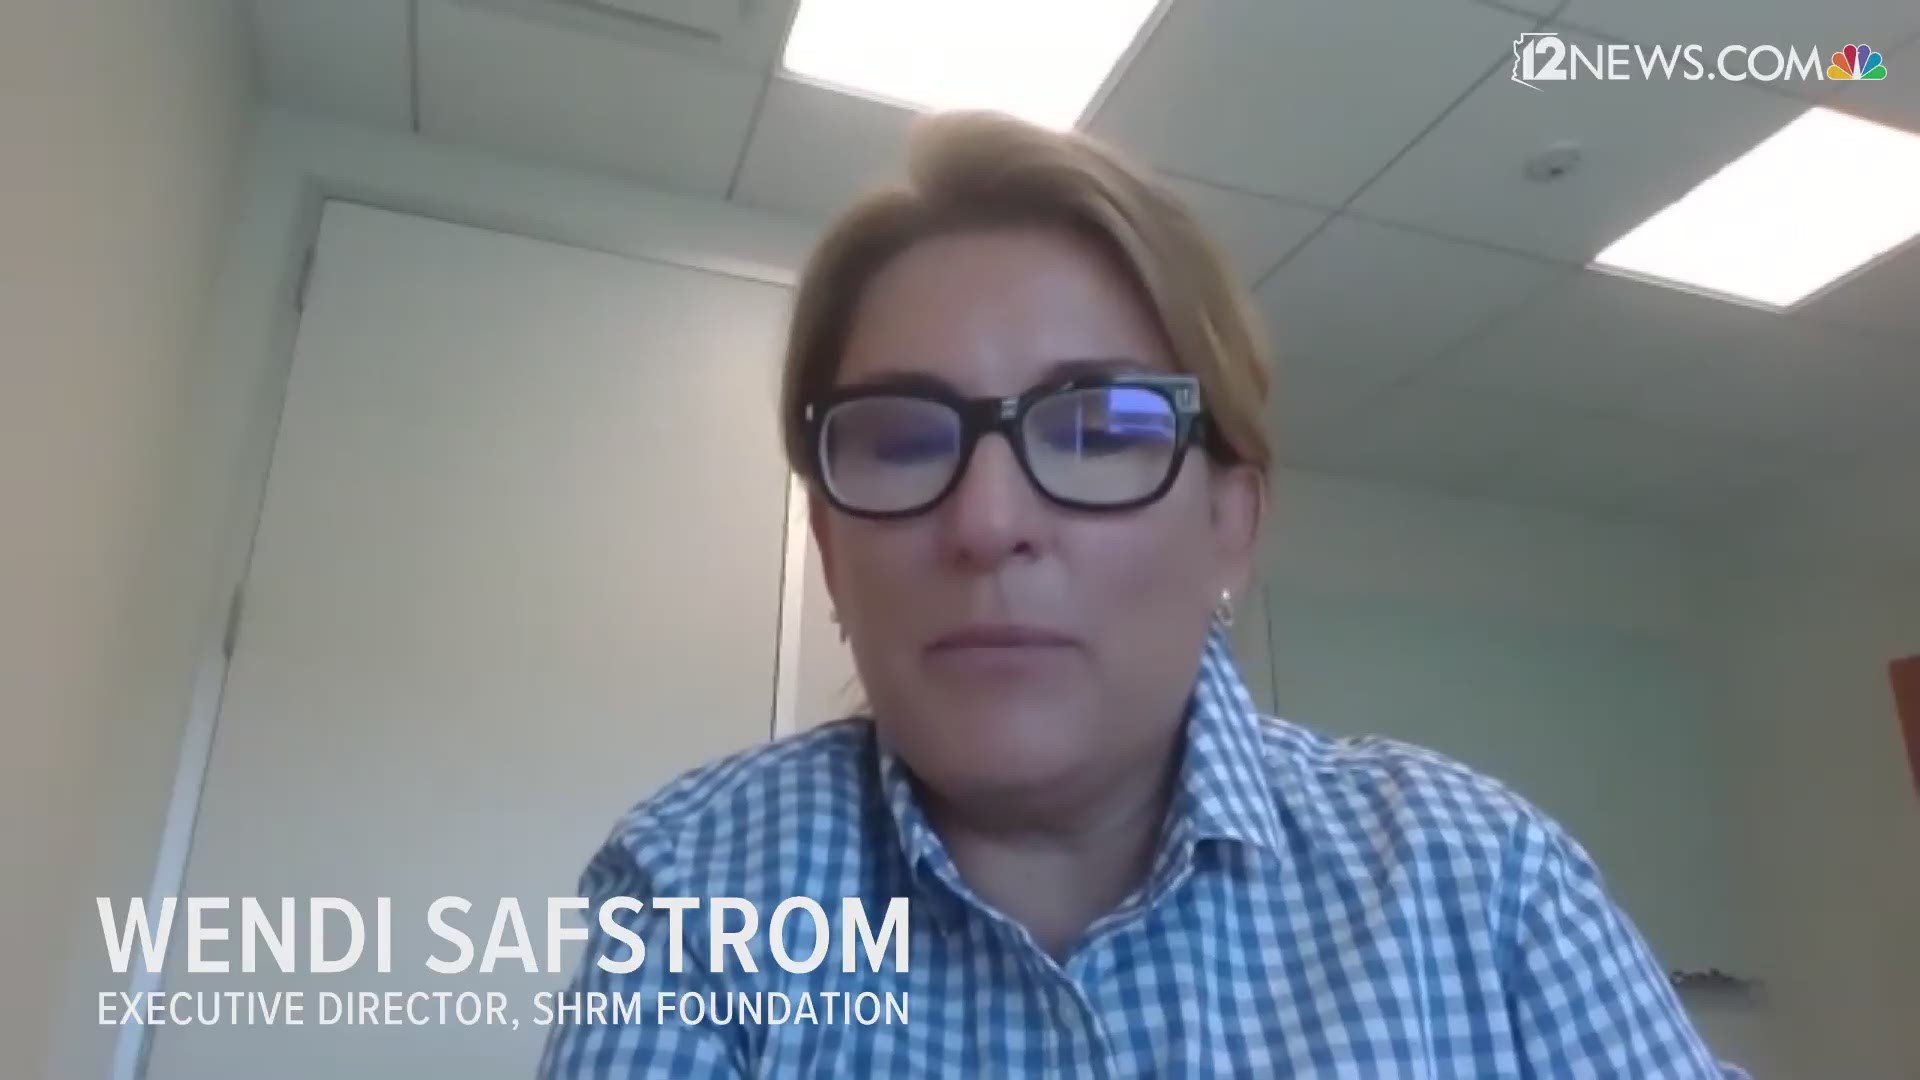 Wendi Safstrom  is the Executive Director of the Society for Human Resource Management Foundation. She discusses the benefits of hiring people with disabilities.